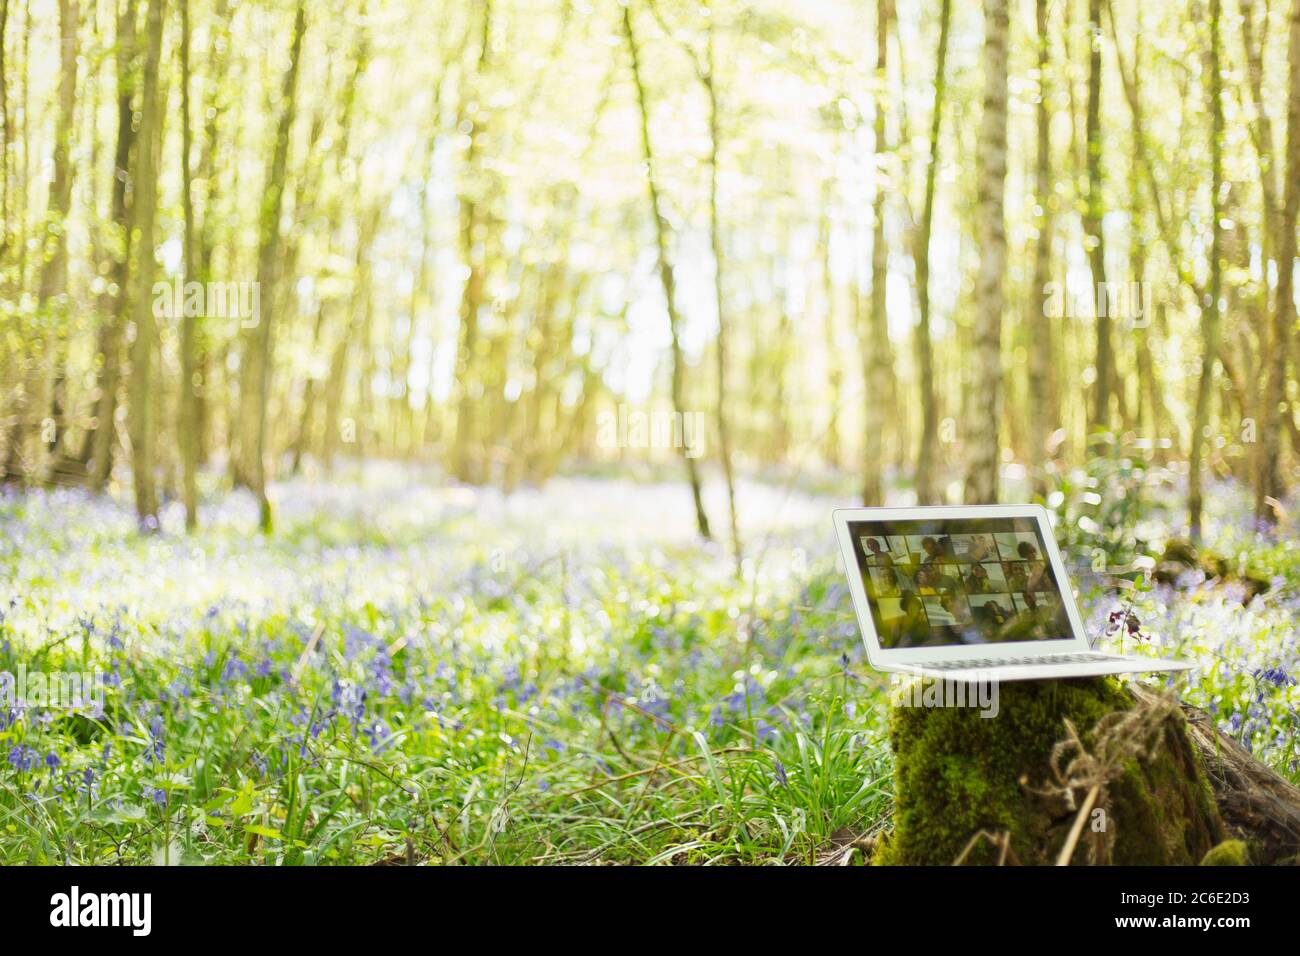 Friends video chatting on laptop screen in idyllic sunny woods Stock Photo